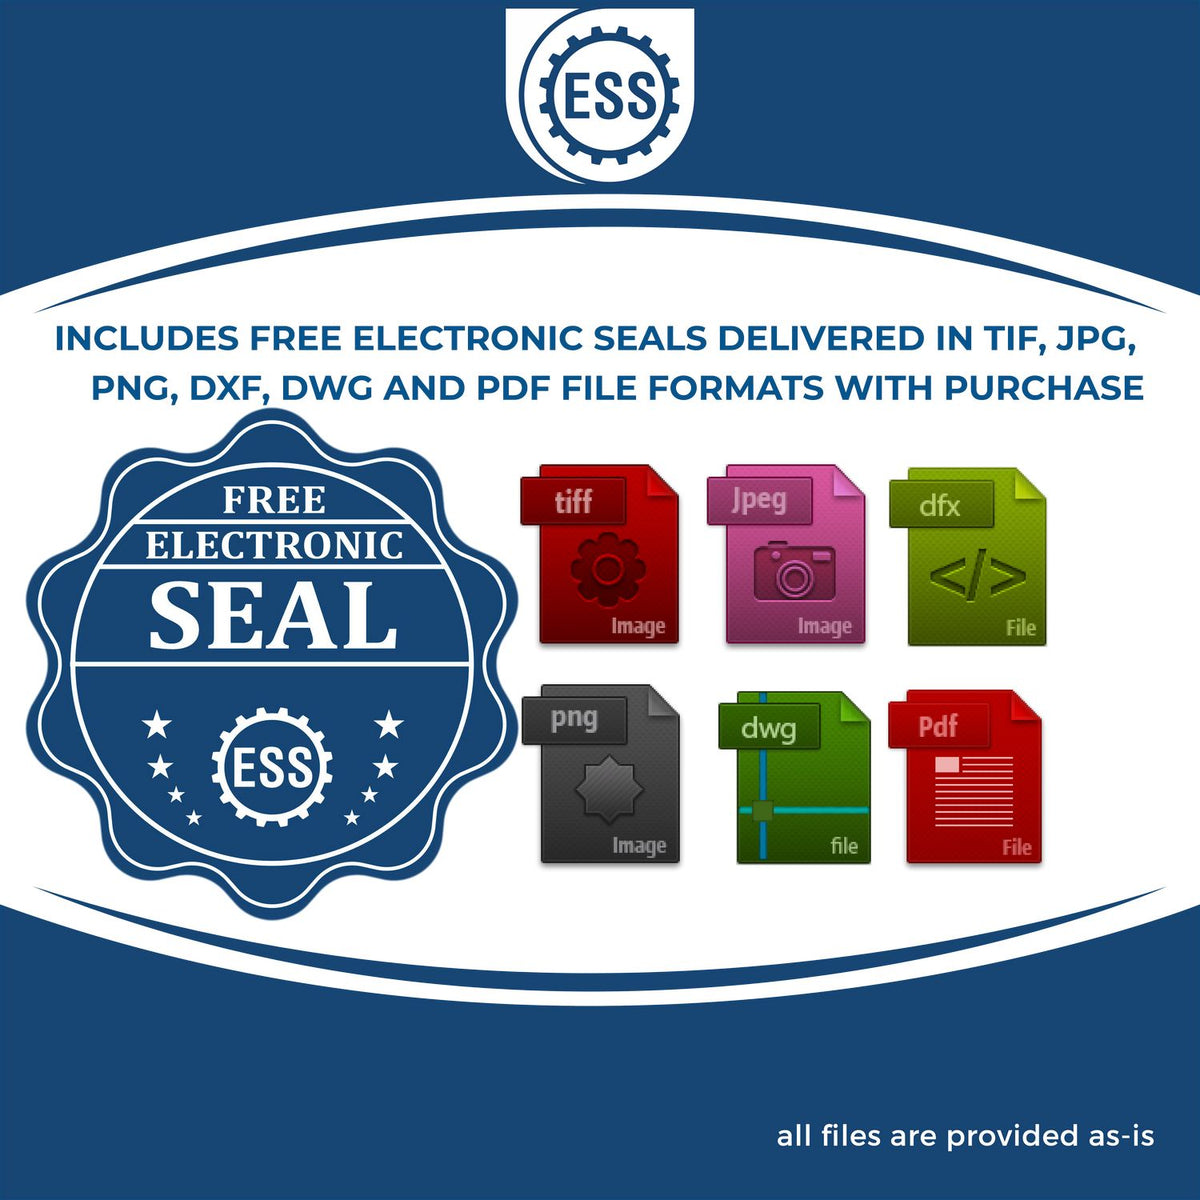 An infographic for the free electronic seal for the Hybrid Kentucky Engineer Seal illustrating the different file type icons such as DXF, DWG, TIF, JPG and PNG.